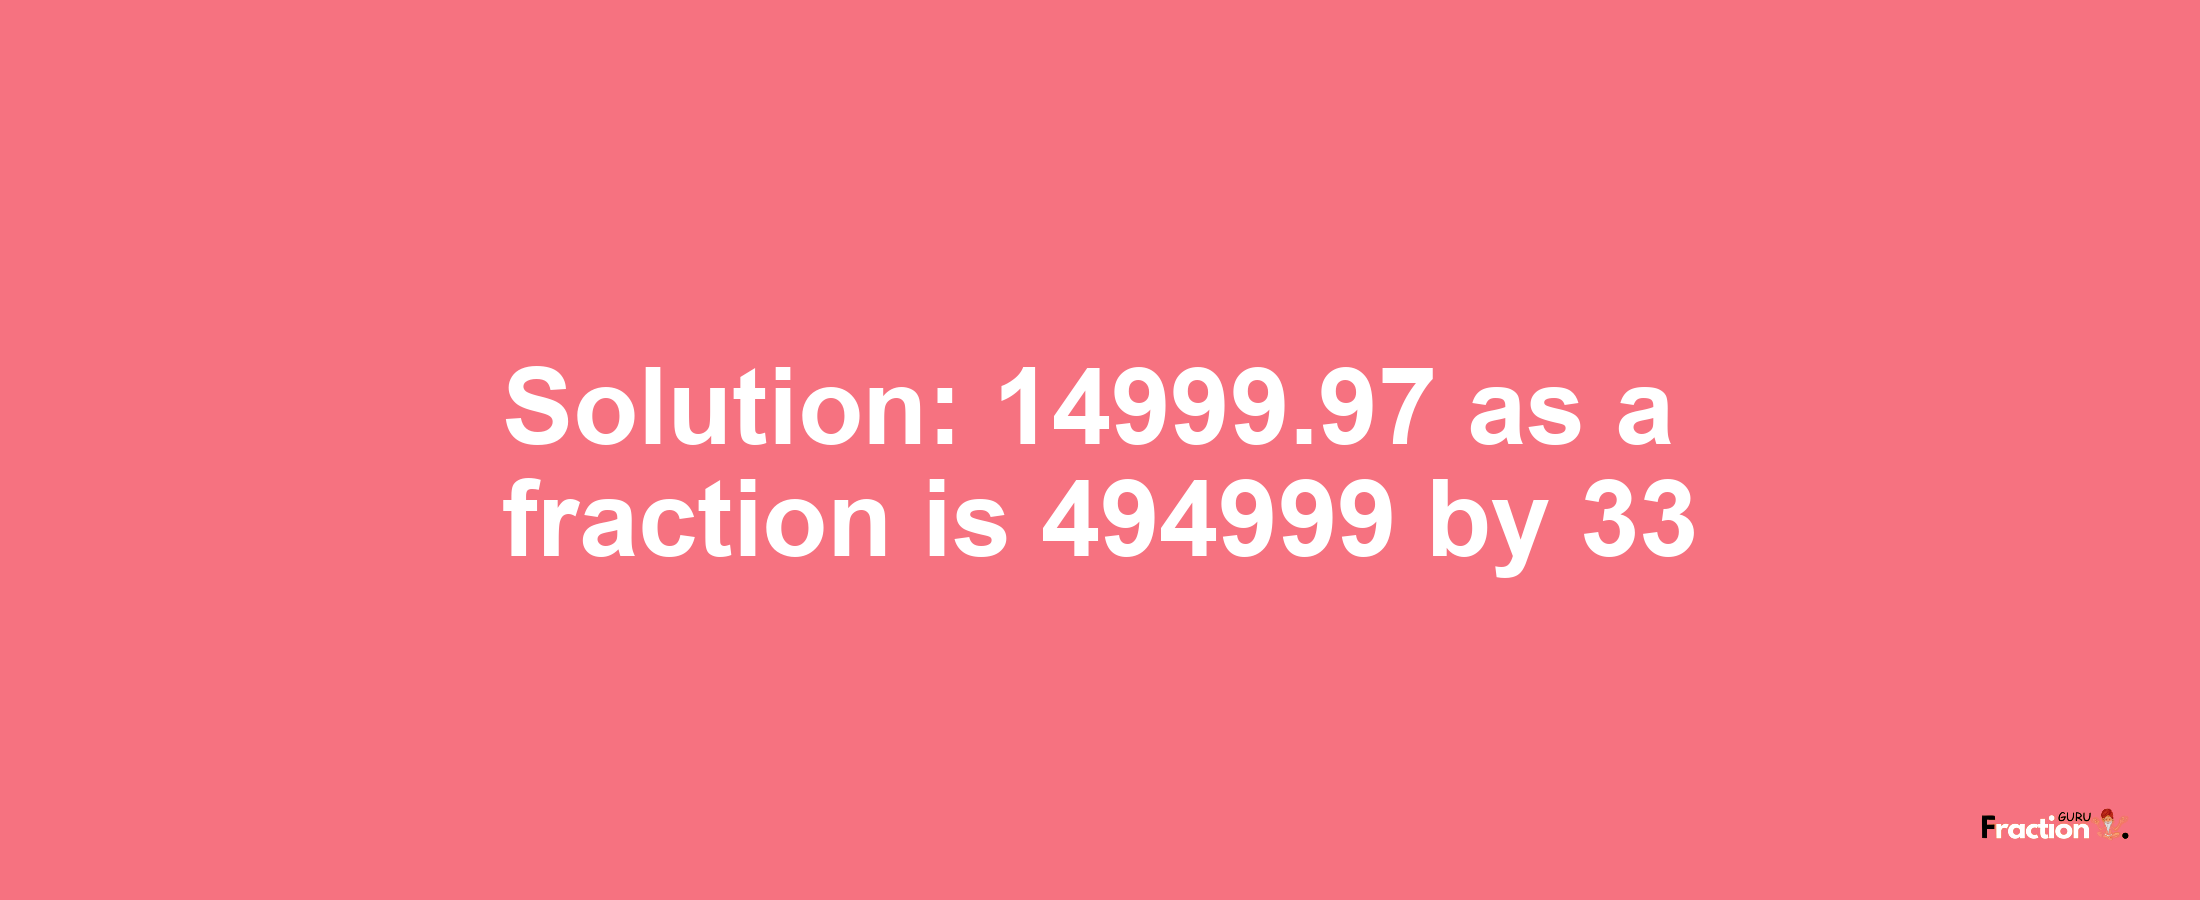 Solution:14999.97 as a fraction is 494999/33